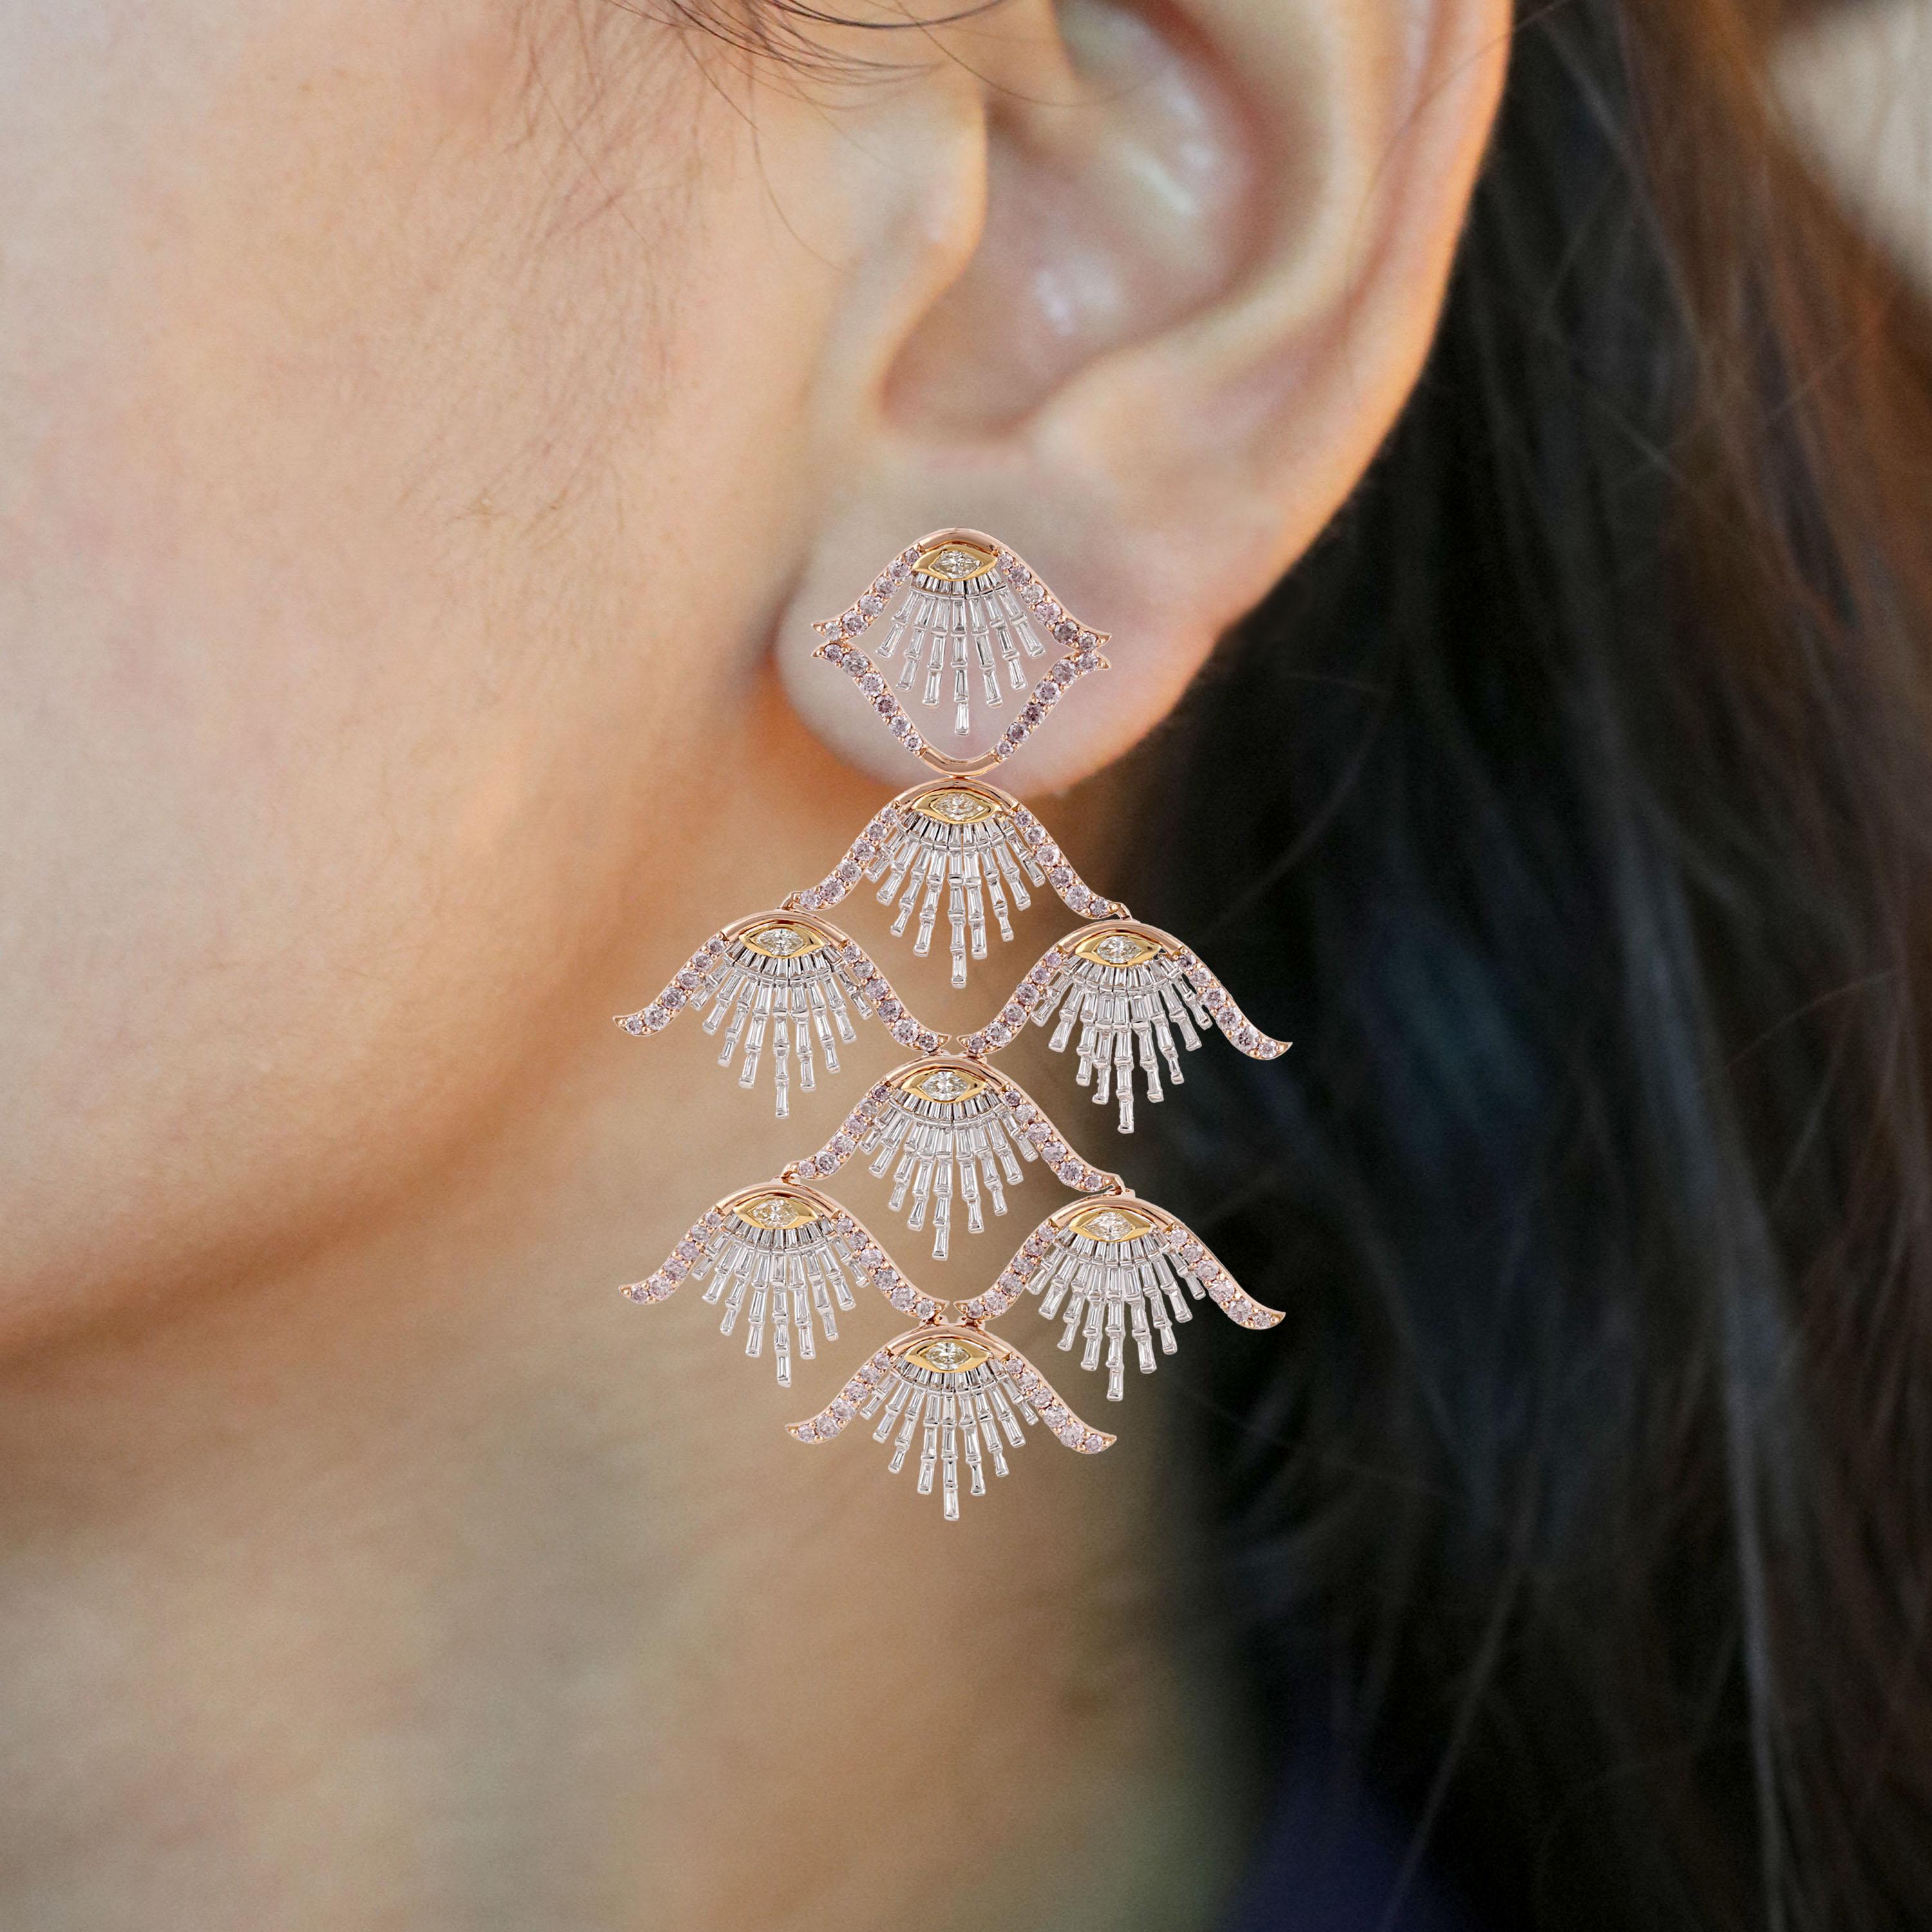 Gross Weight: 47.66 Grams
Diamond Weight: 11.60 cts
IGI Certification can be done on request.

Video of the product  can be shared on request.

These dangling earrings are reminiscent of a sea shell. Fabricated in 18 karat white, yellow and rose